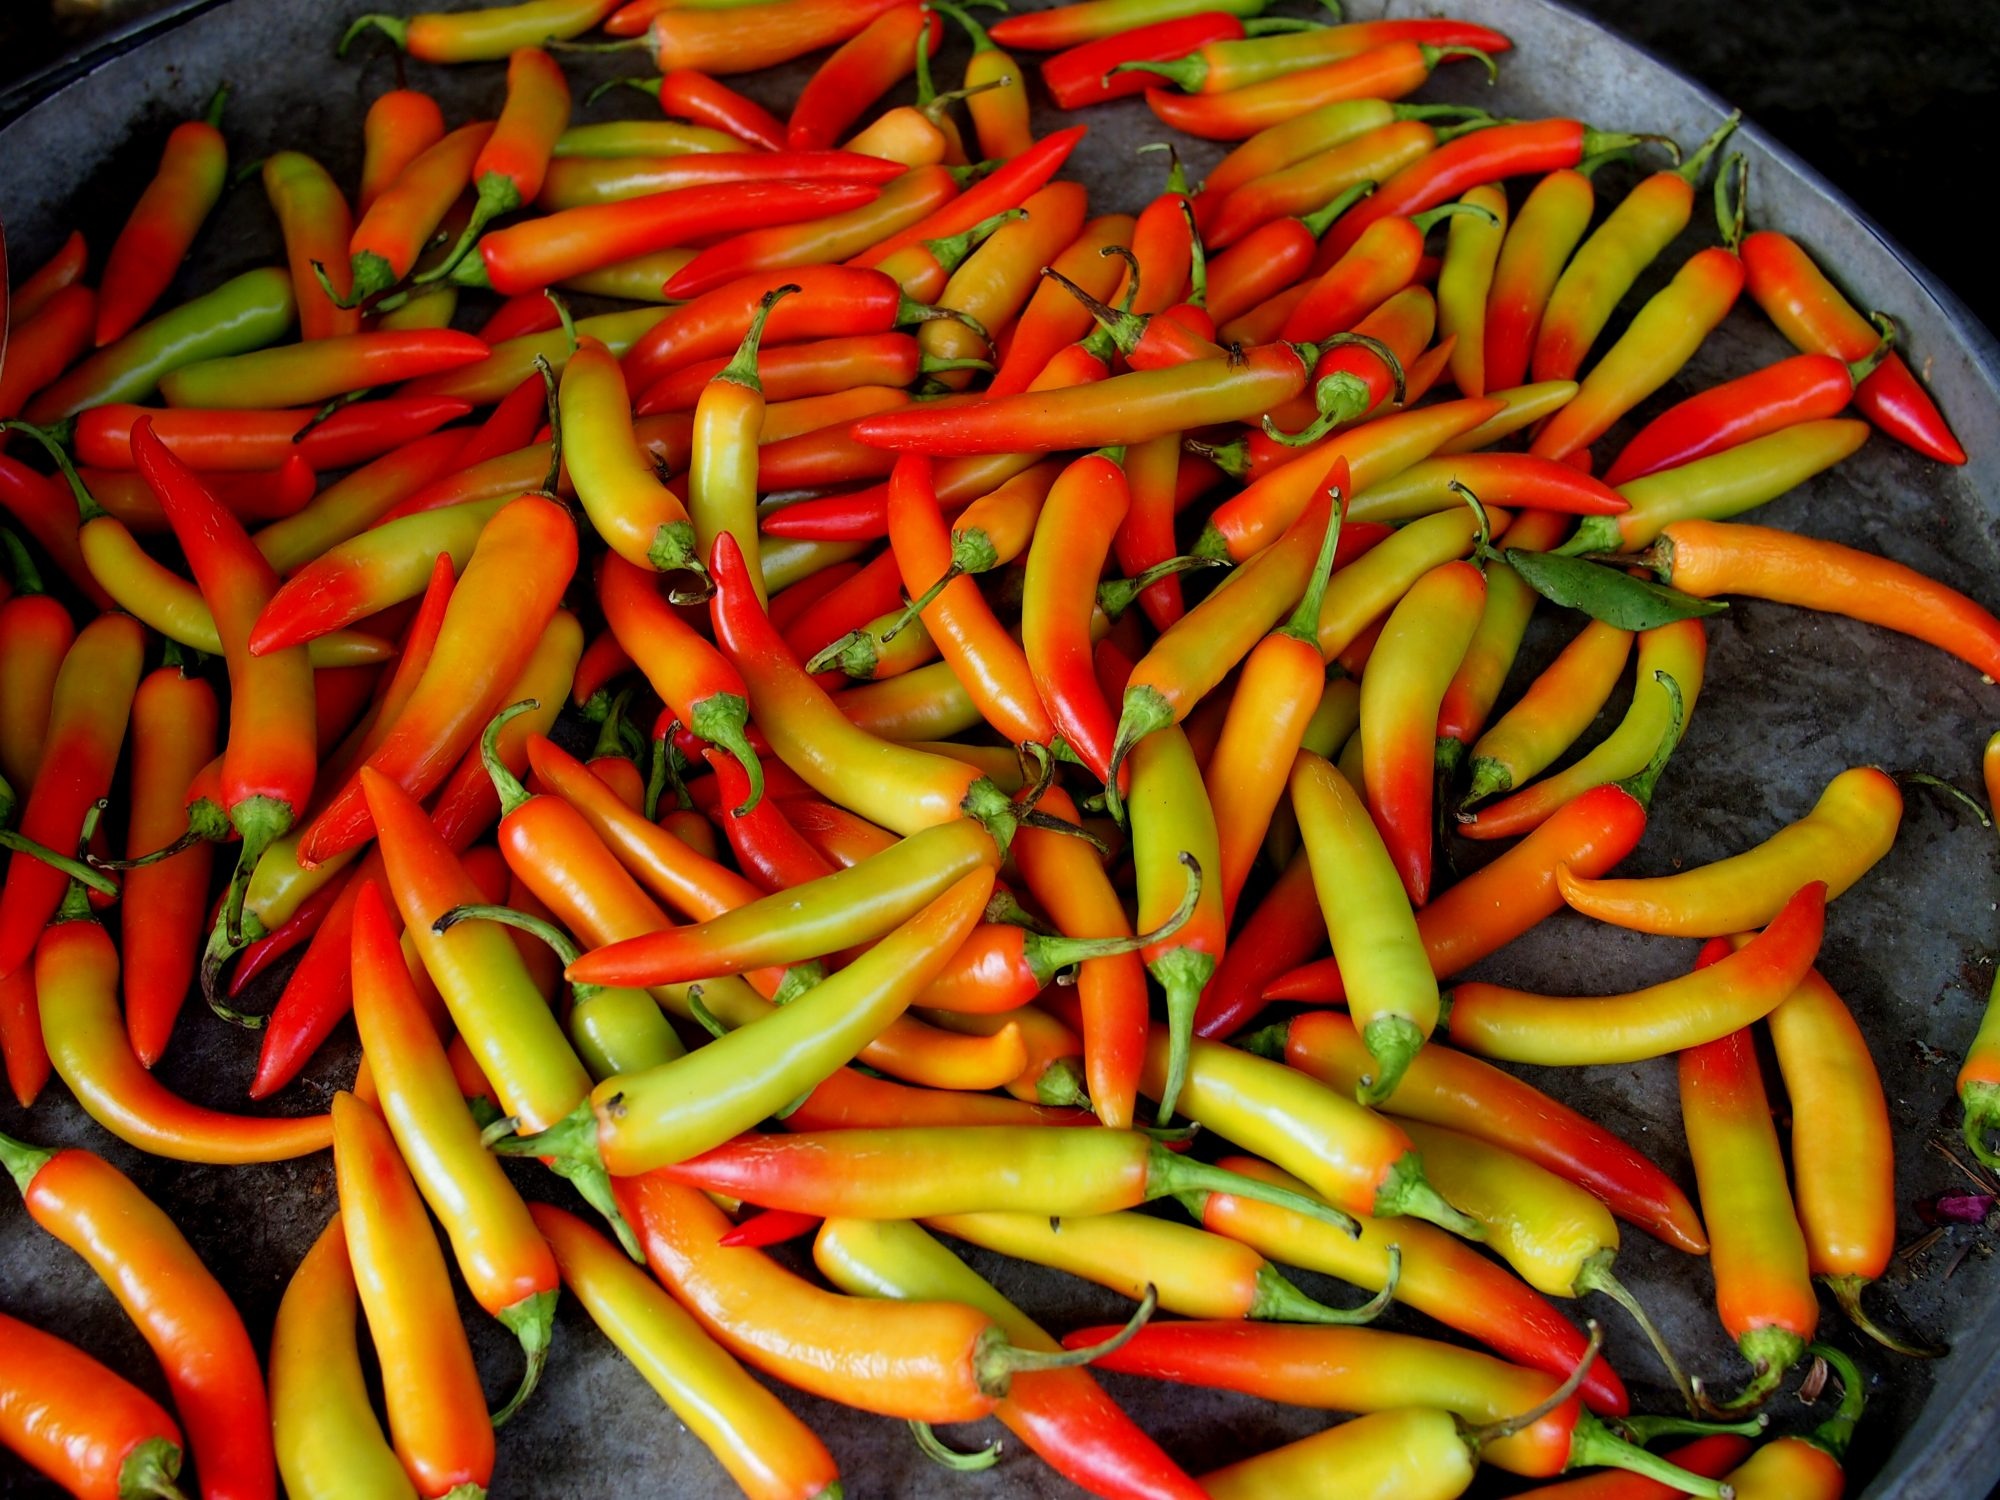 Chili pepper journey, Ancient history, Flavorful evolution, Culinary delight, 2000x1500 HD Desktop